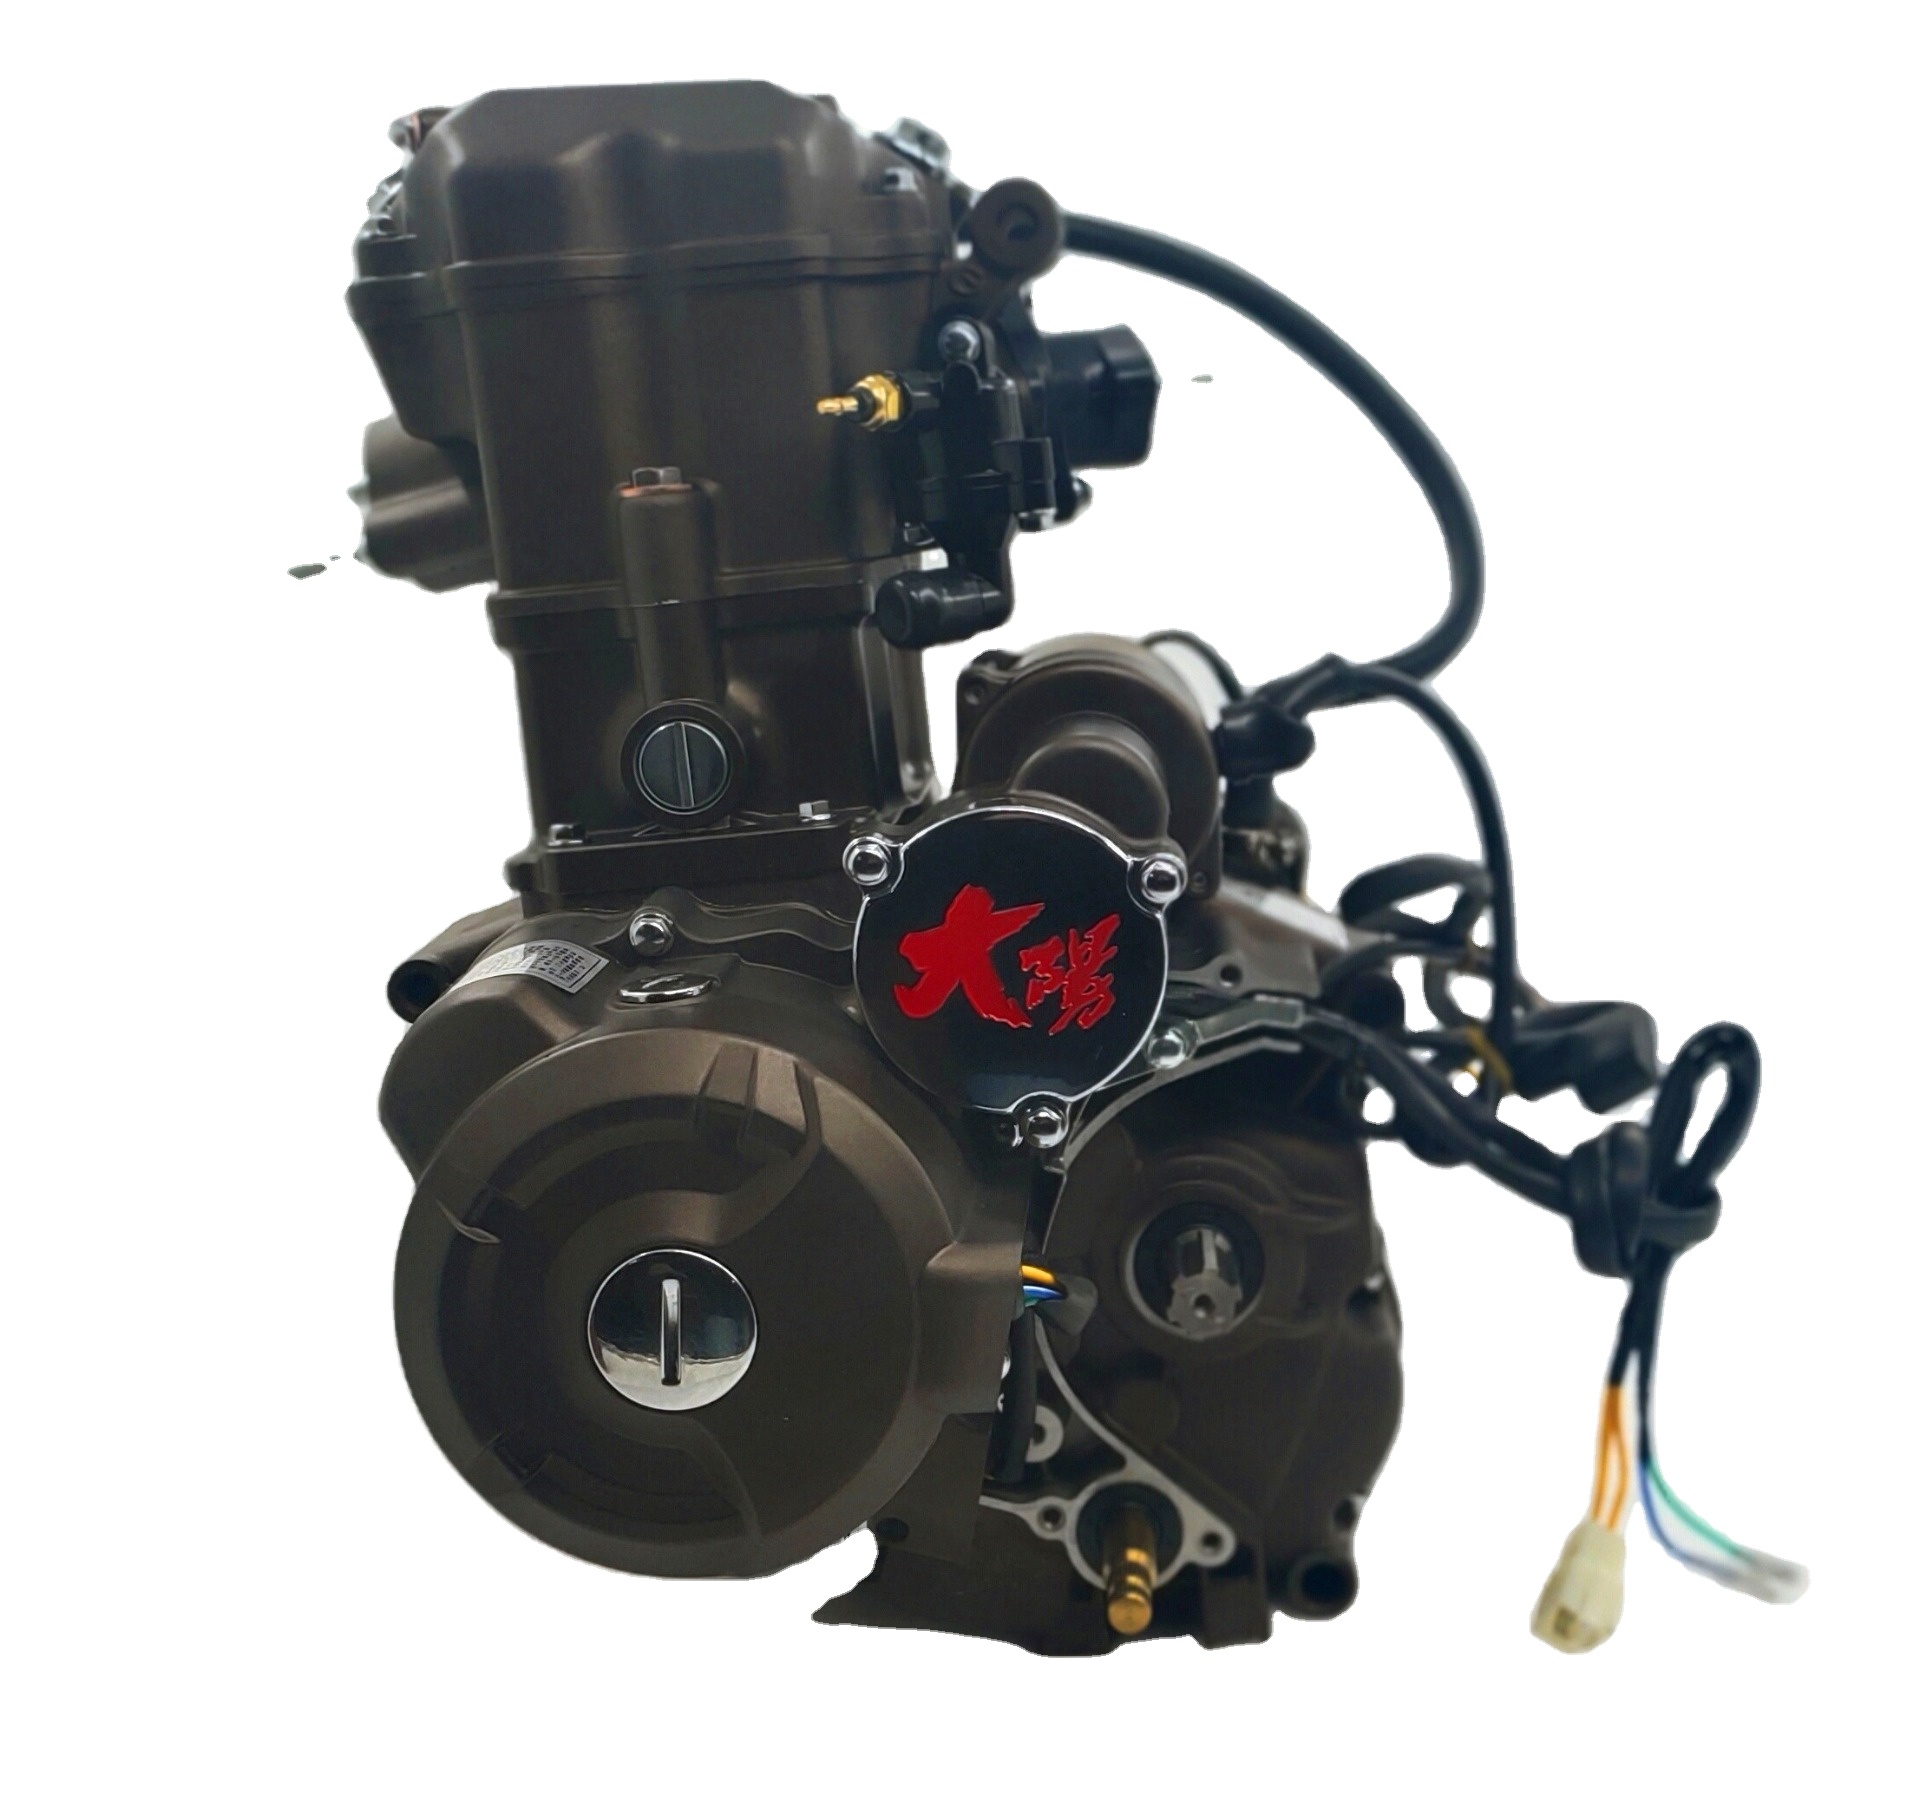 CG150 New Water-cooled DAYANG LIFAN Motorcycle Engine Assembly Single Cylinder Four Stroke Style China Sea 4 Stroke 1 Cylinder